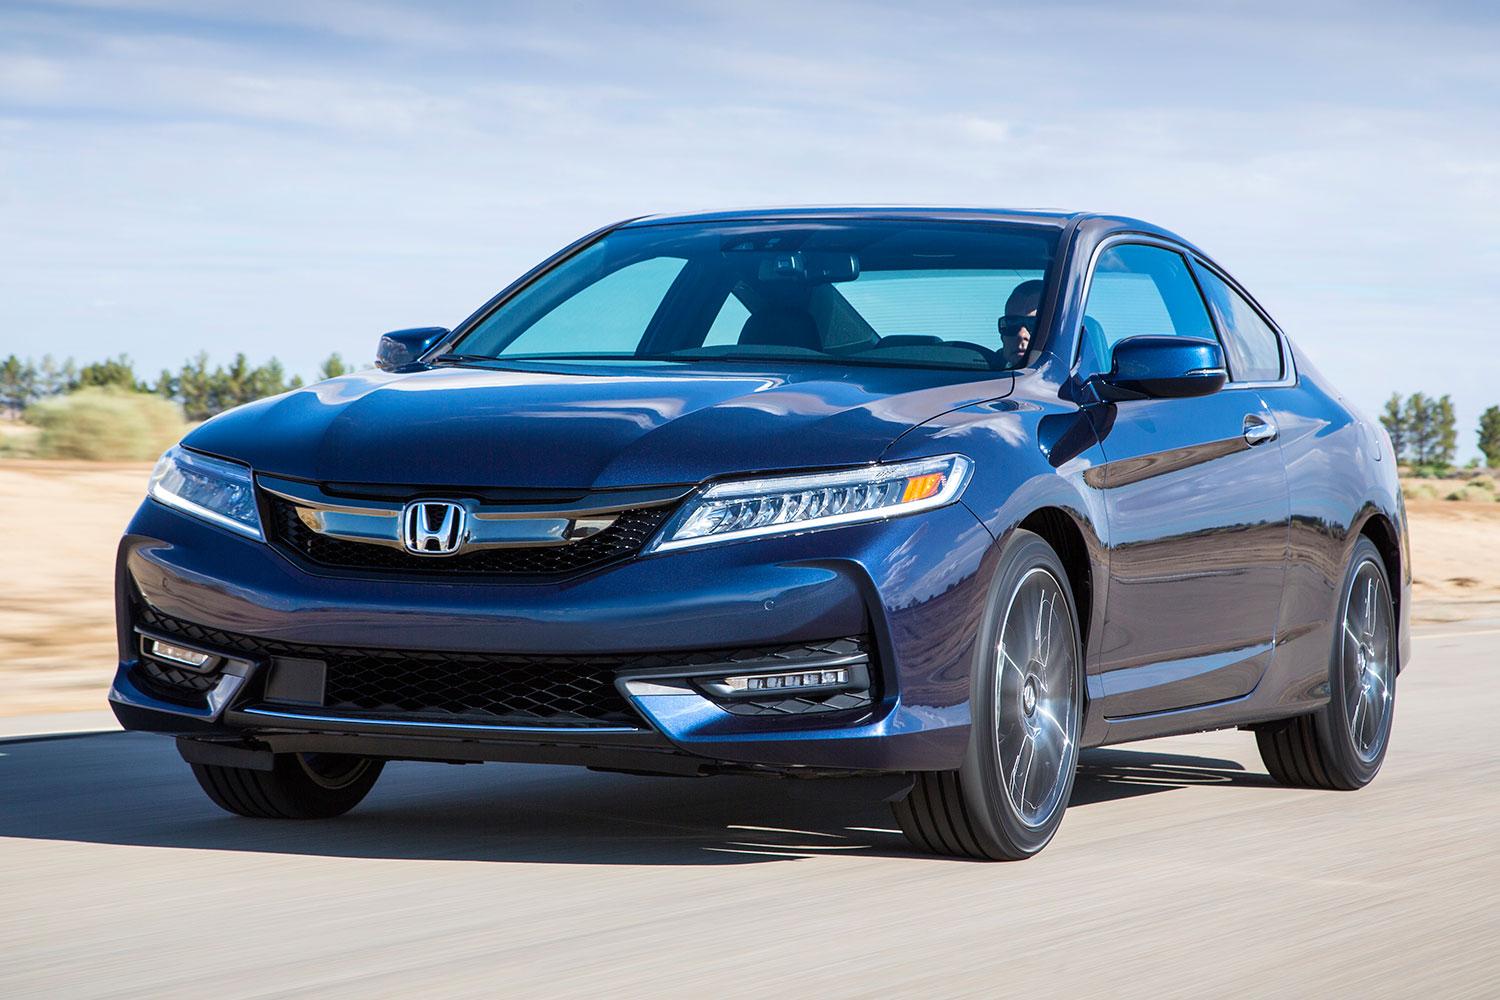 2016 honda accord first drive 16 coupe 046